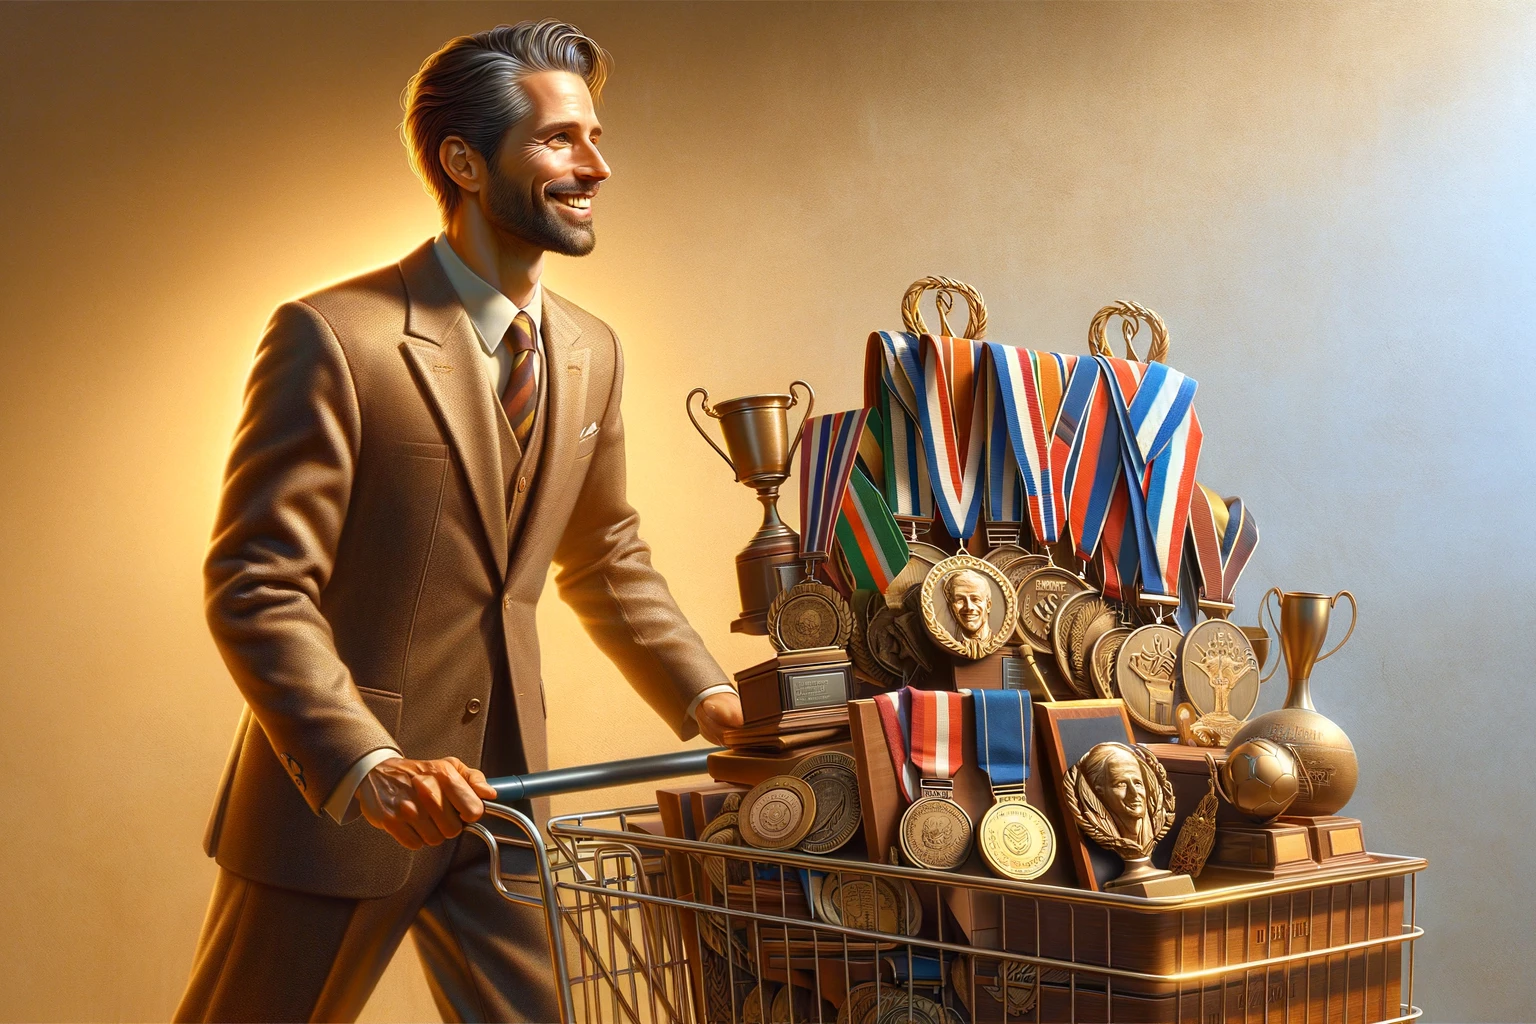 A well-dressed event organiser with a trolley full of medals and trophies.